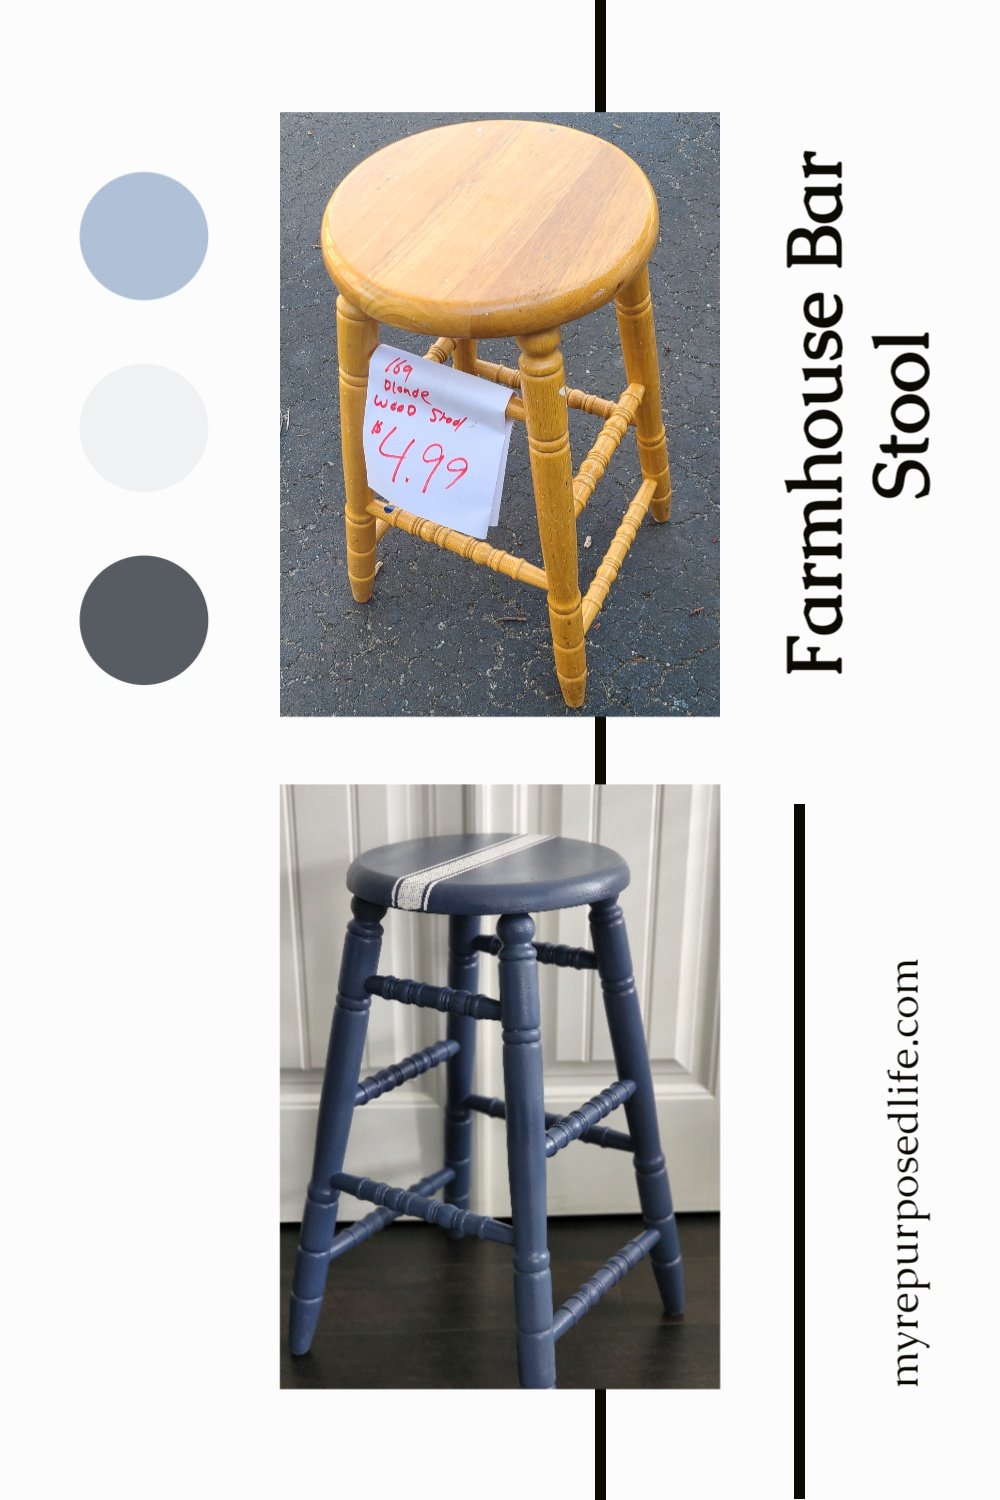 How to give a plain farmhouse bar stool a makeover using paint and stencil to do a grain sack design. Step by step directions. #MyRepurposedLife #upcycle #furniture #makeover #farmhouse #stool #grainsack via @repurposedlife